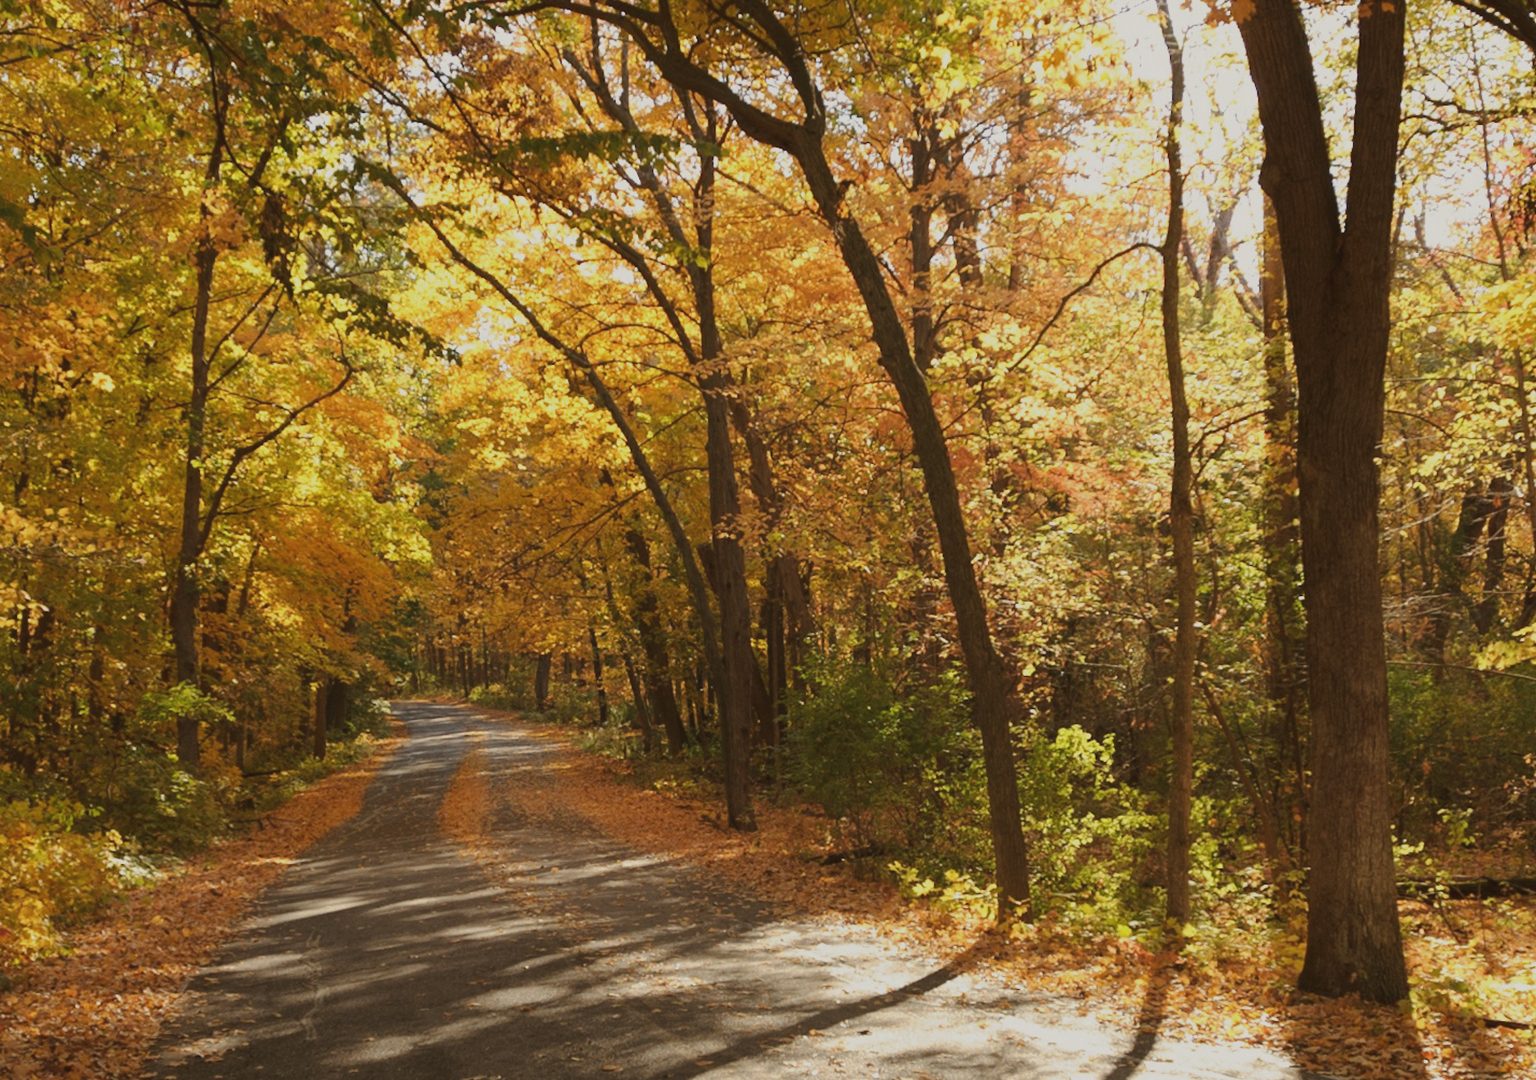 A road extends into the background through wooded area as sunlight shines through trees during autumn